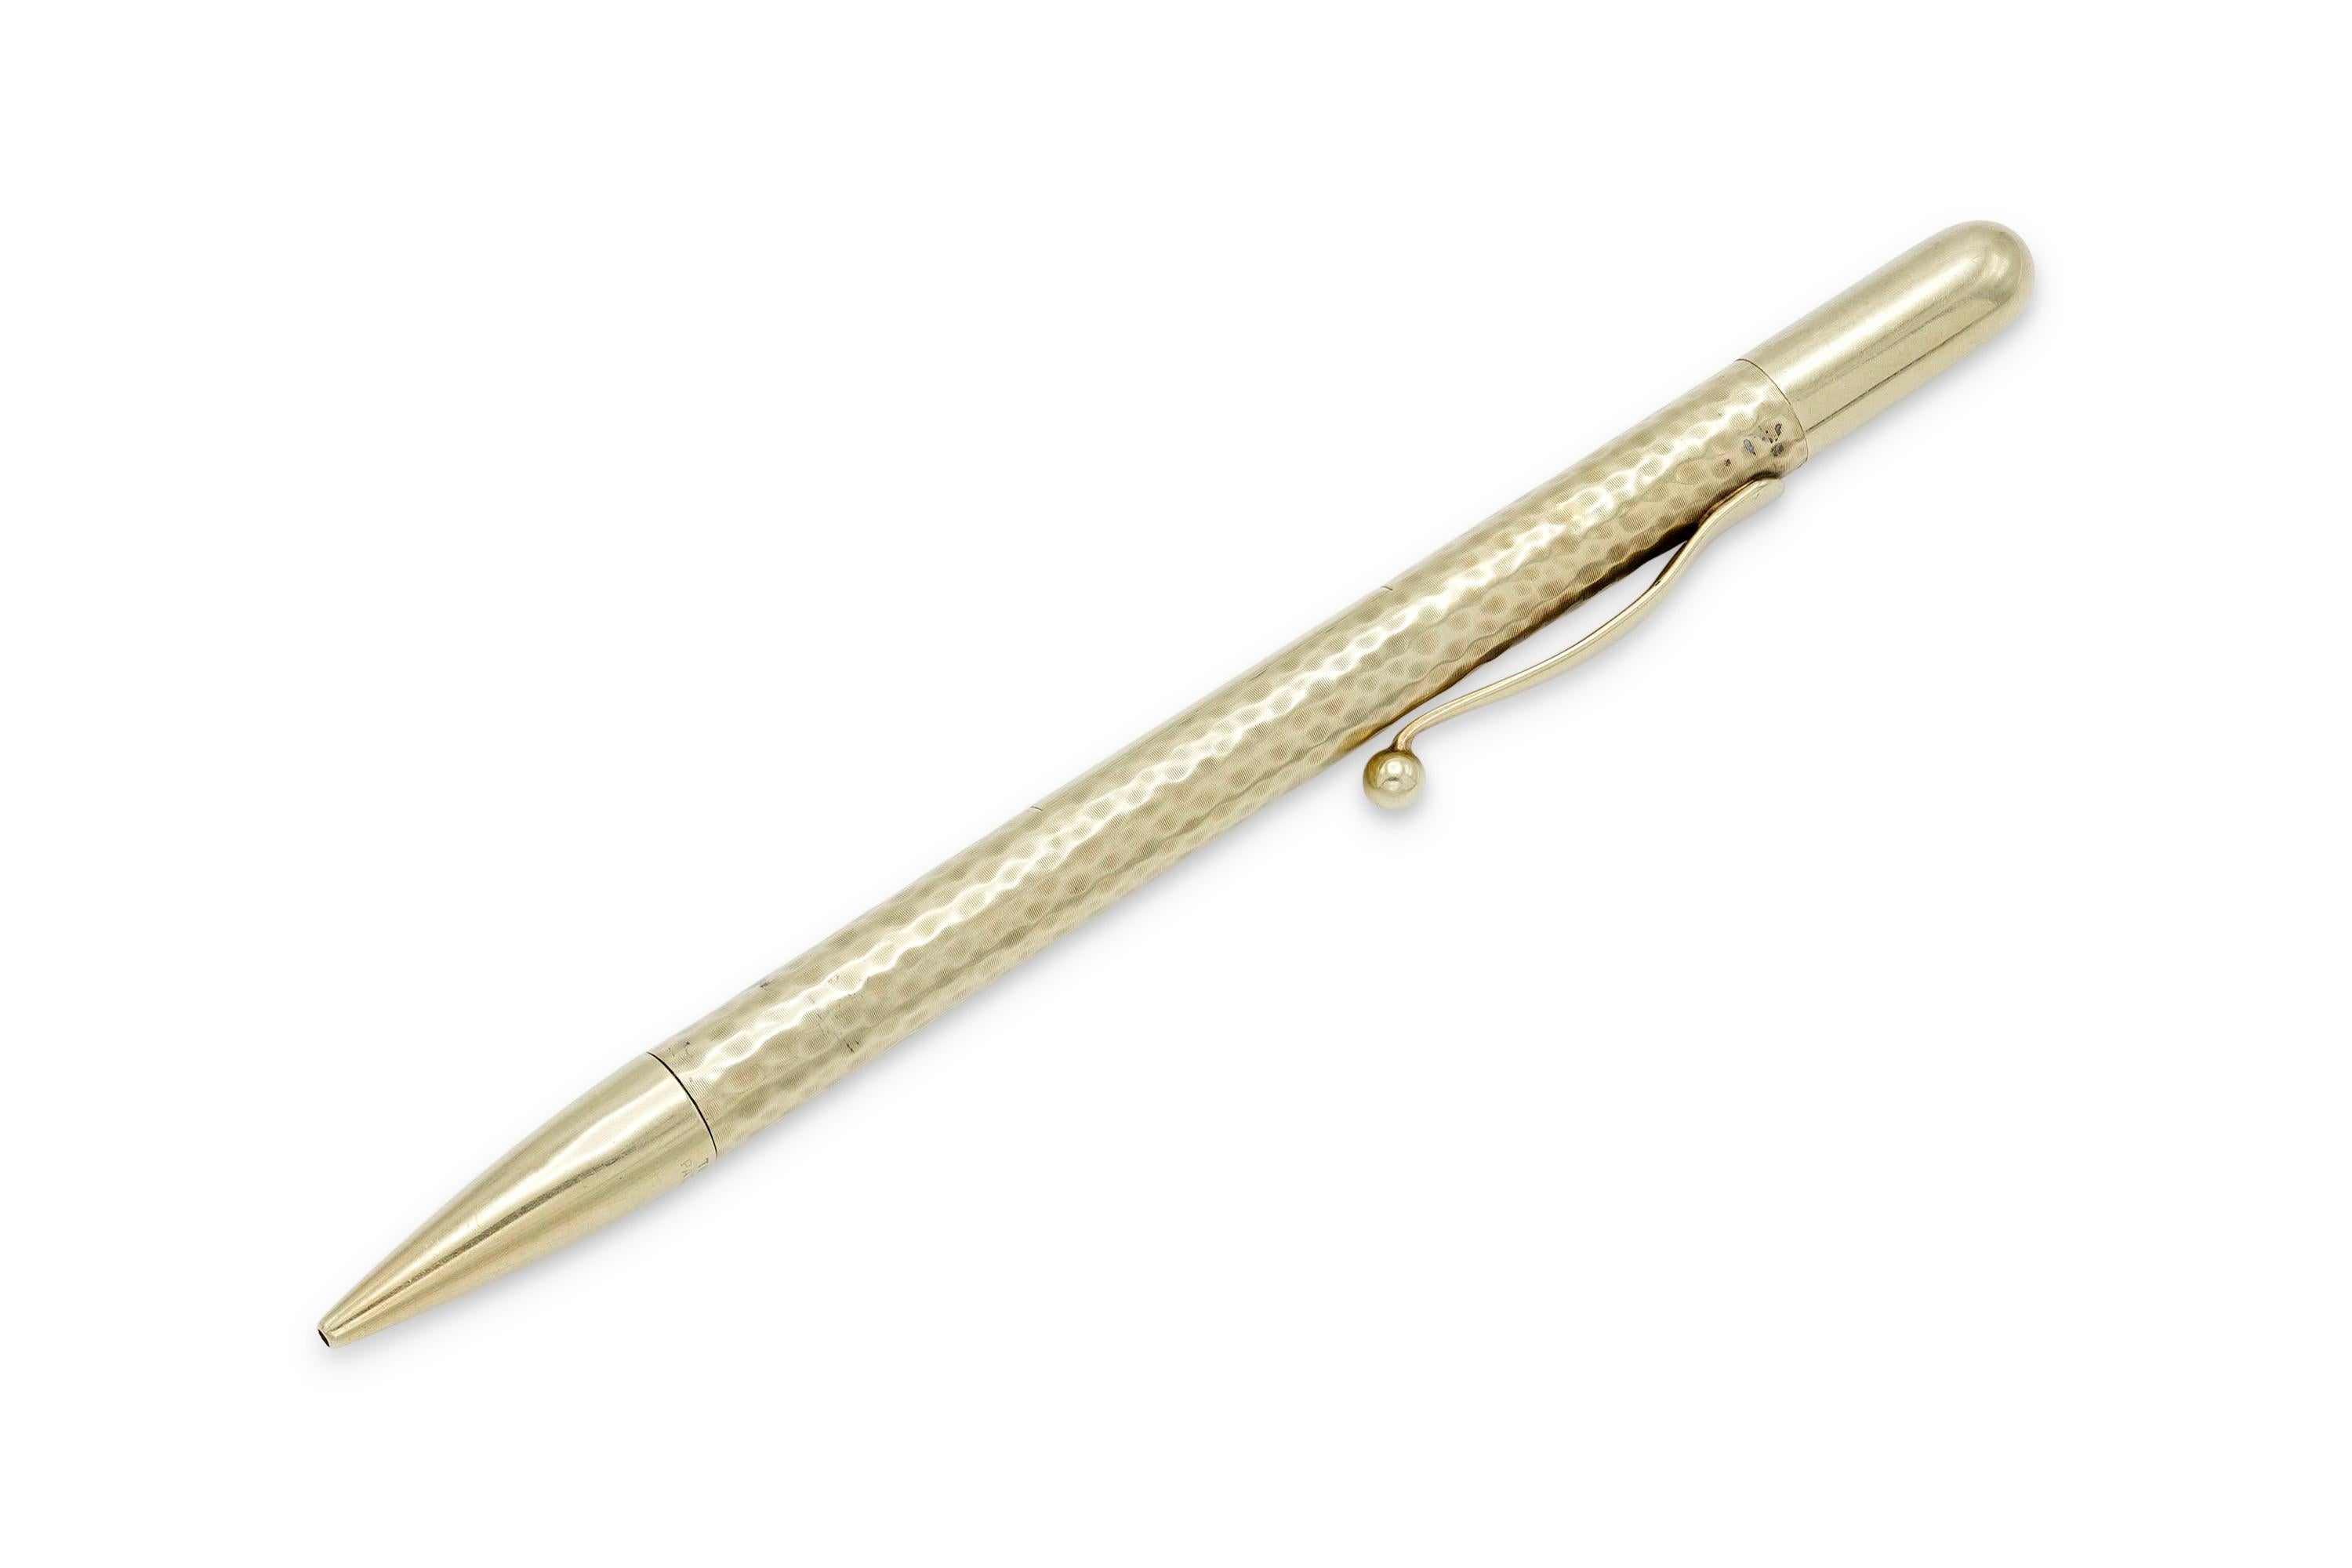 Finely crafted in 14k yellow hammered gold.
Signed by Tiffany & Co.
Circa 1960s